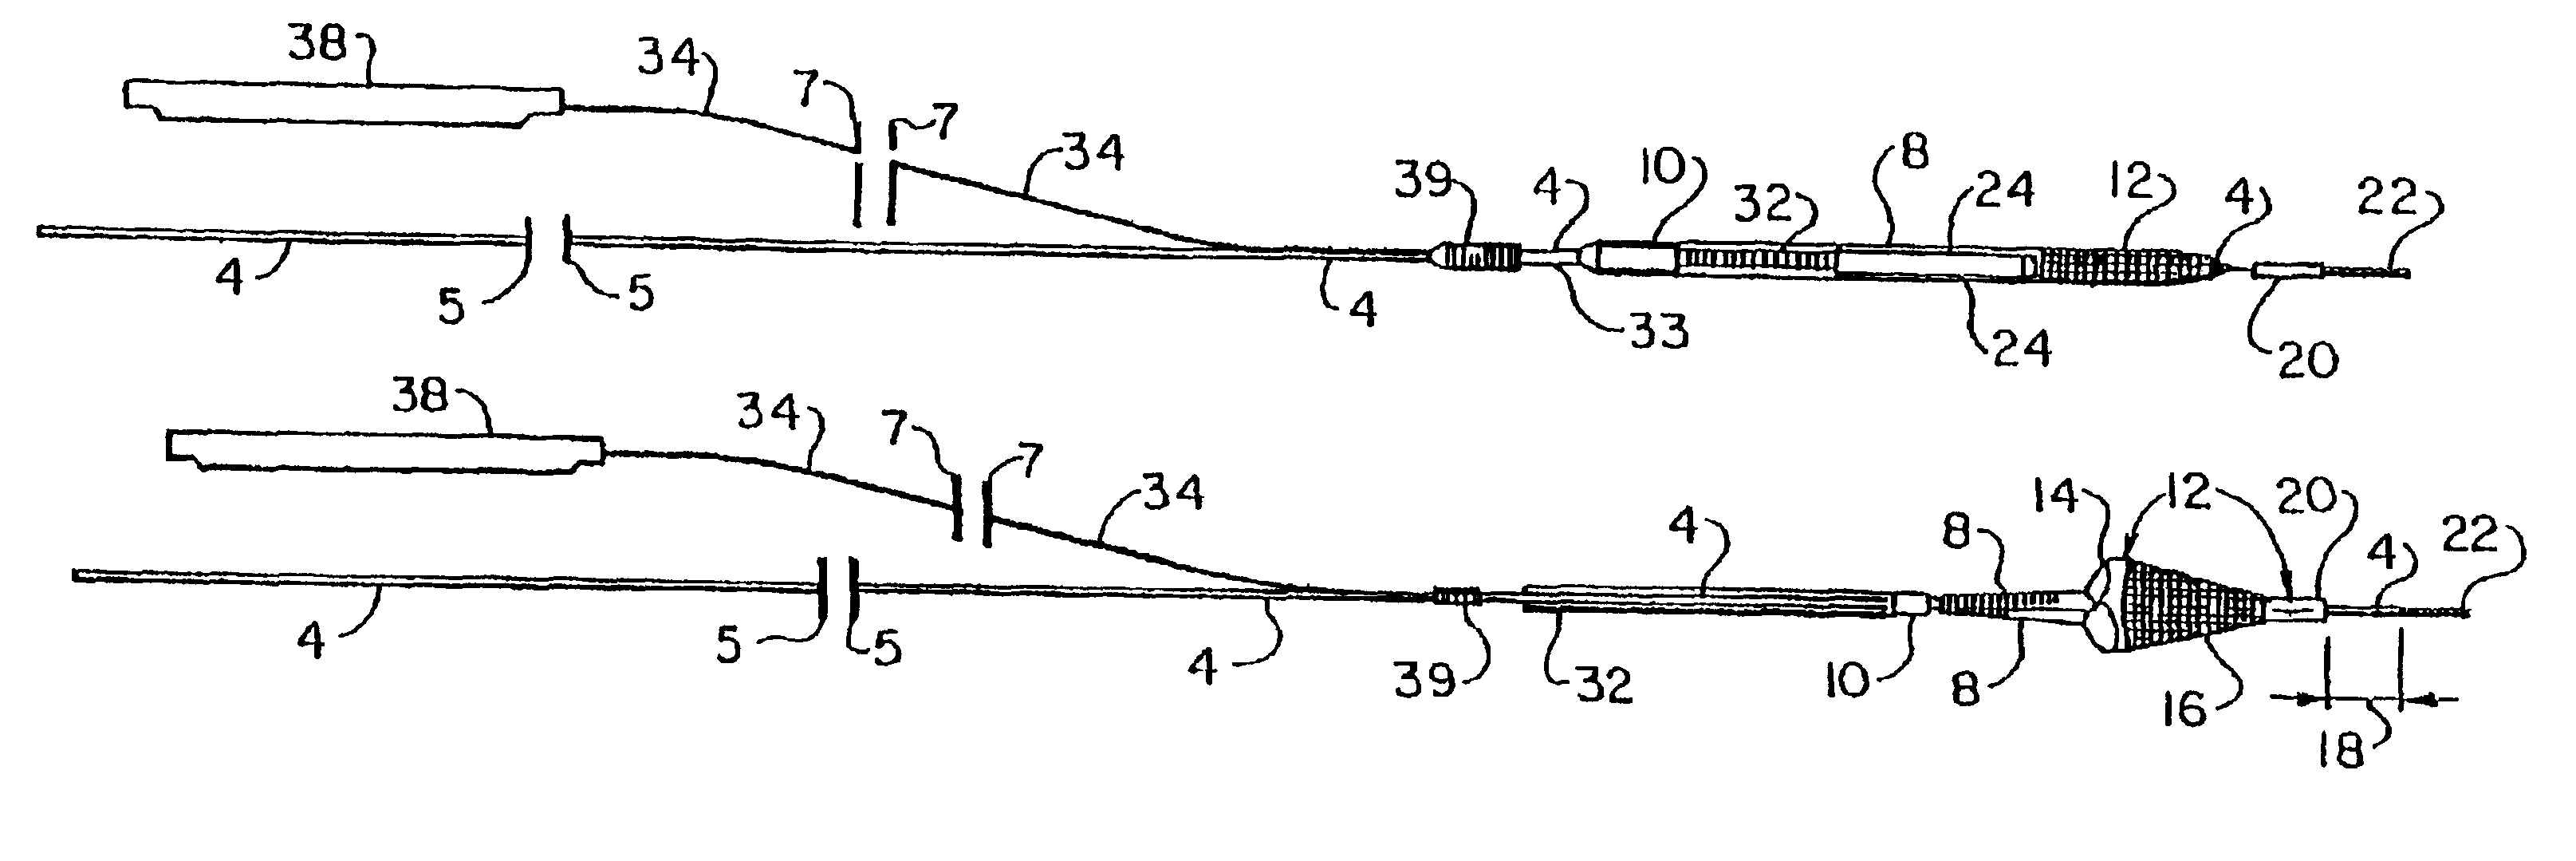 Apparatus for capturing objects beyond an operative site utilizing a capture device delivered on a medical guide wire